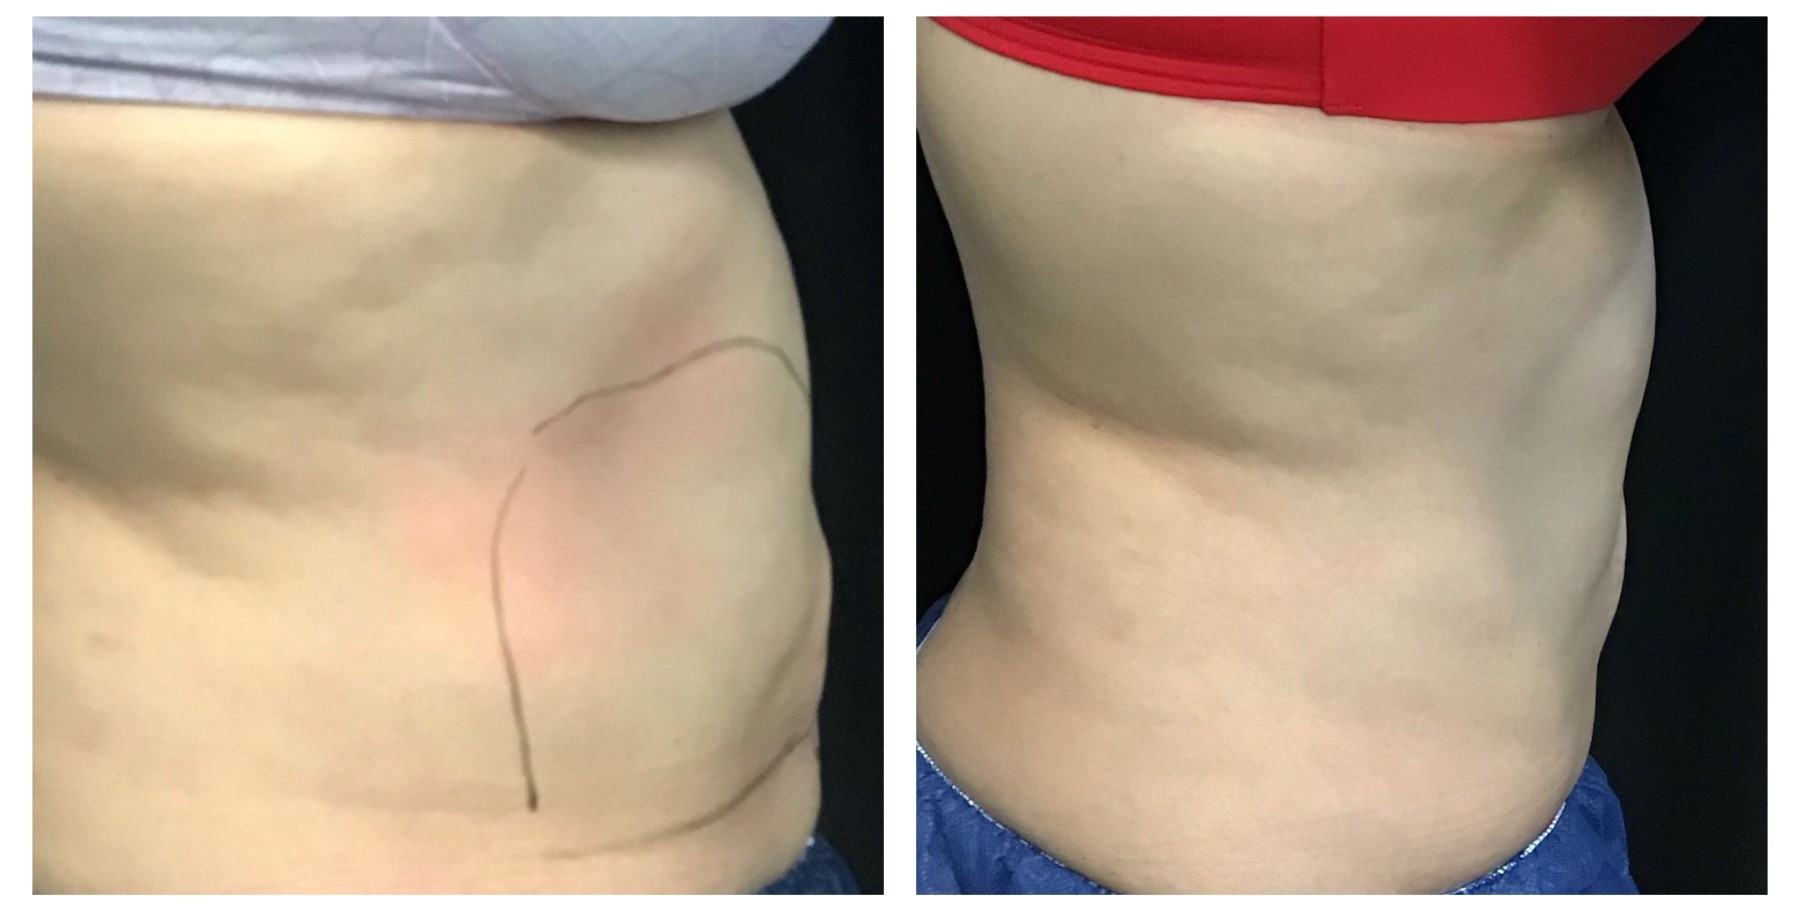 Before and After Pictures of CoolSculpting on Stomach